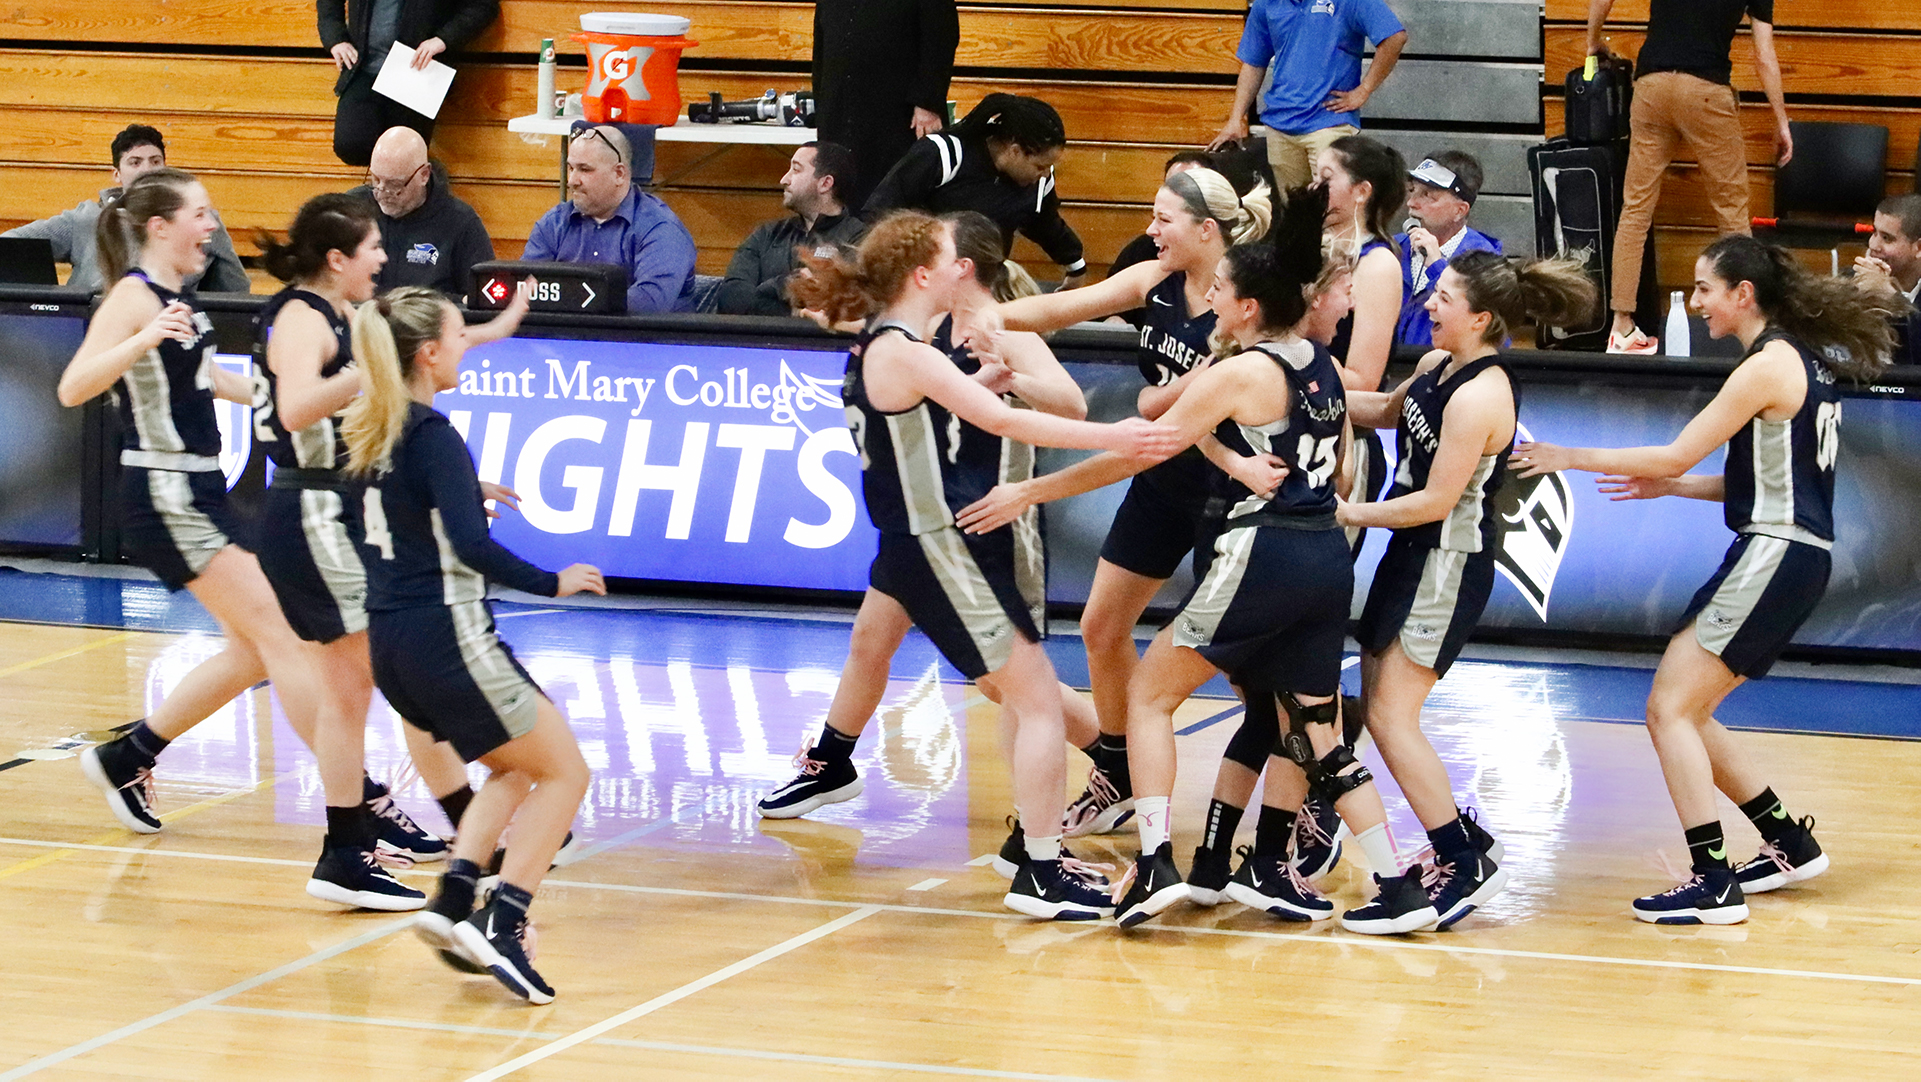 No. 4 Bears Square Off With No. 3 USMMA for #SkylineWBB Championship Title This Saturday